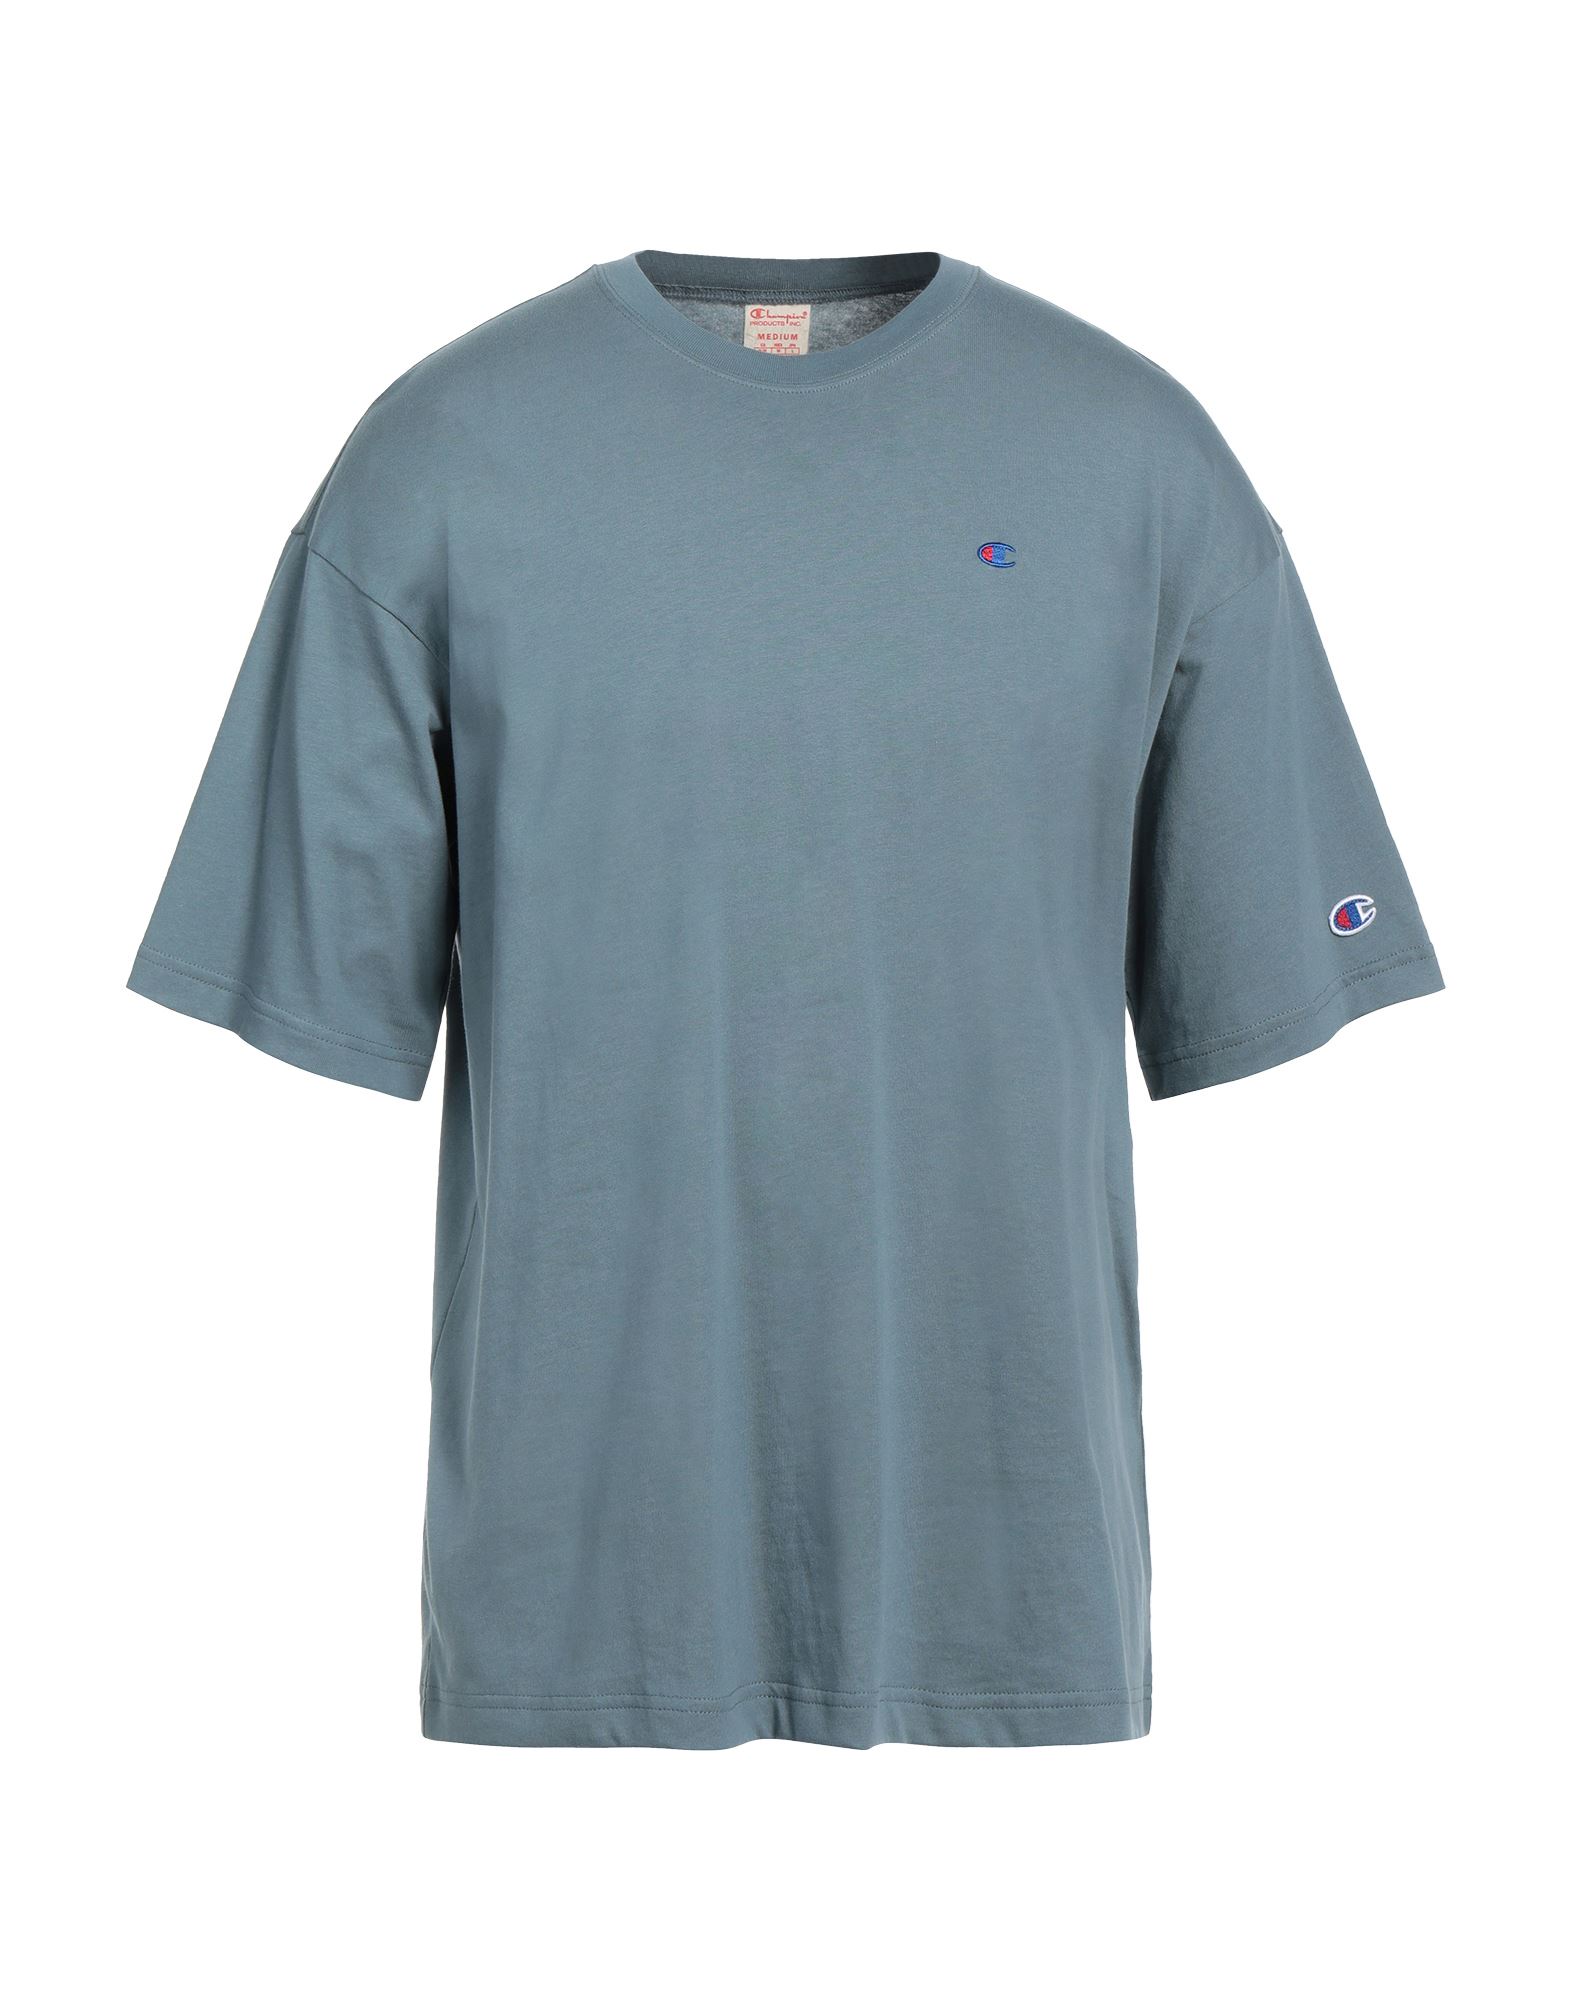 Champion T-shirts In Blue